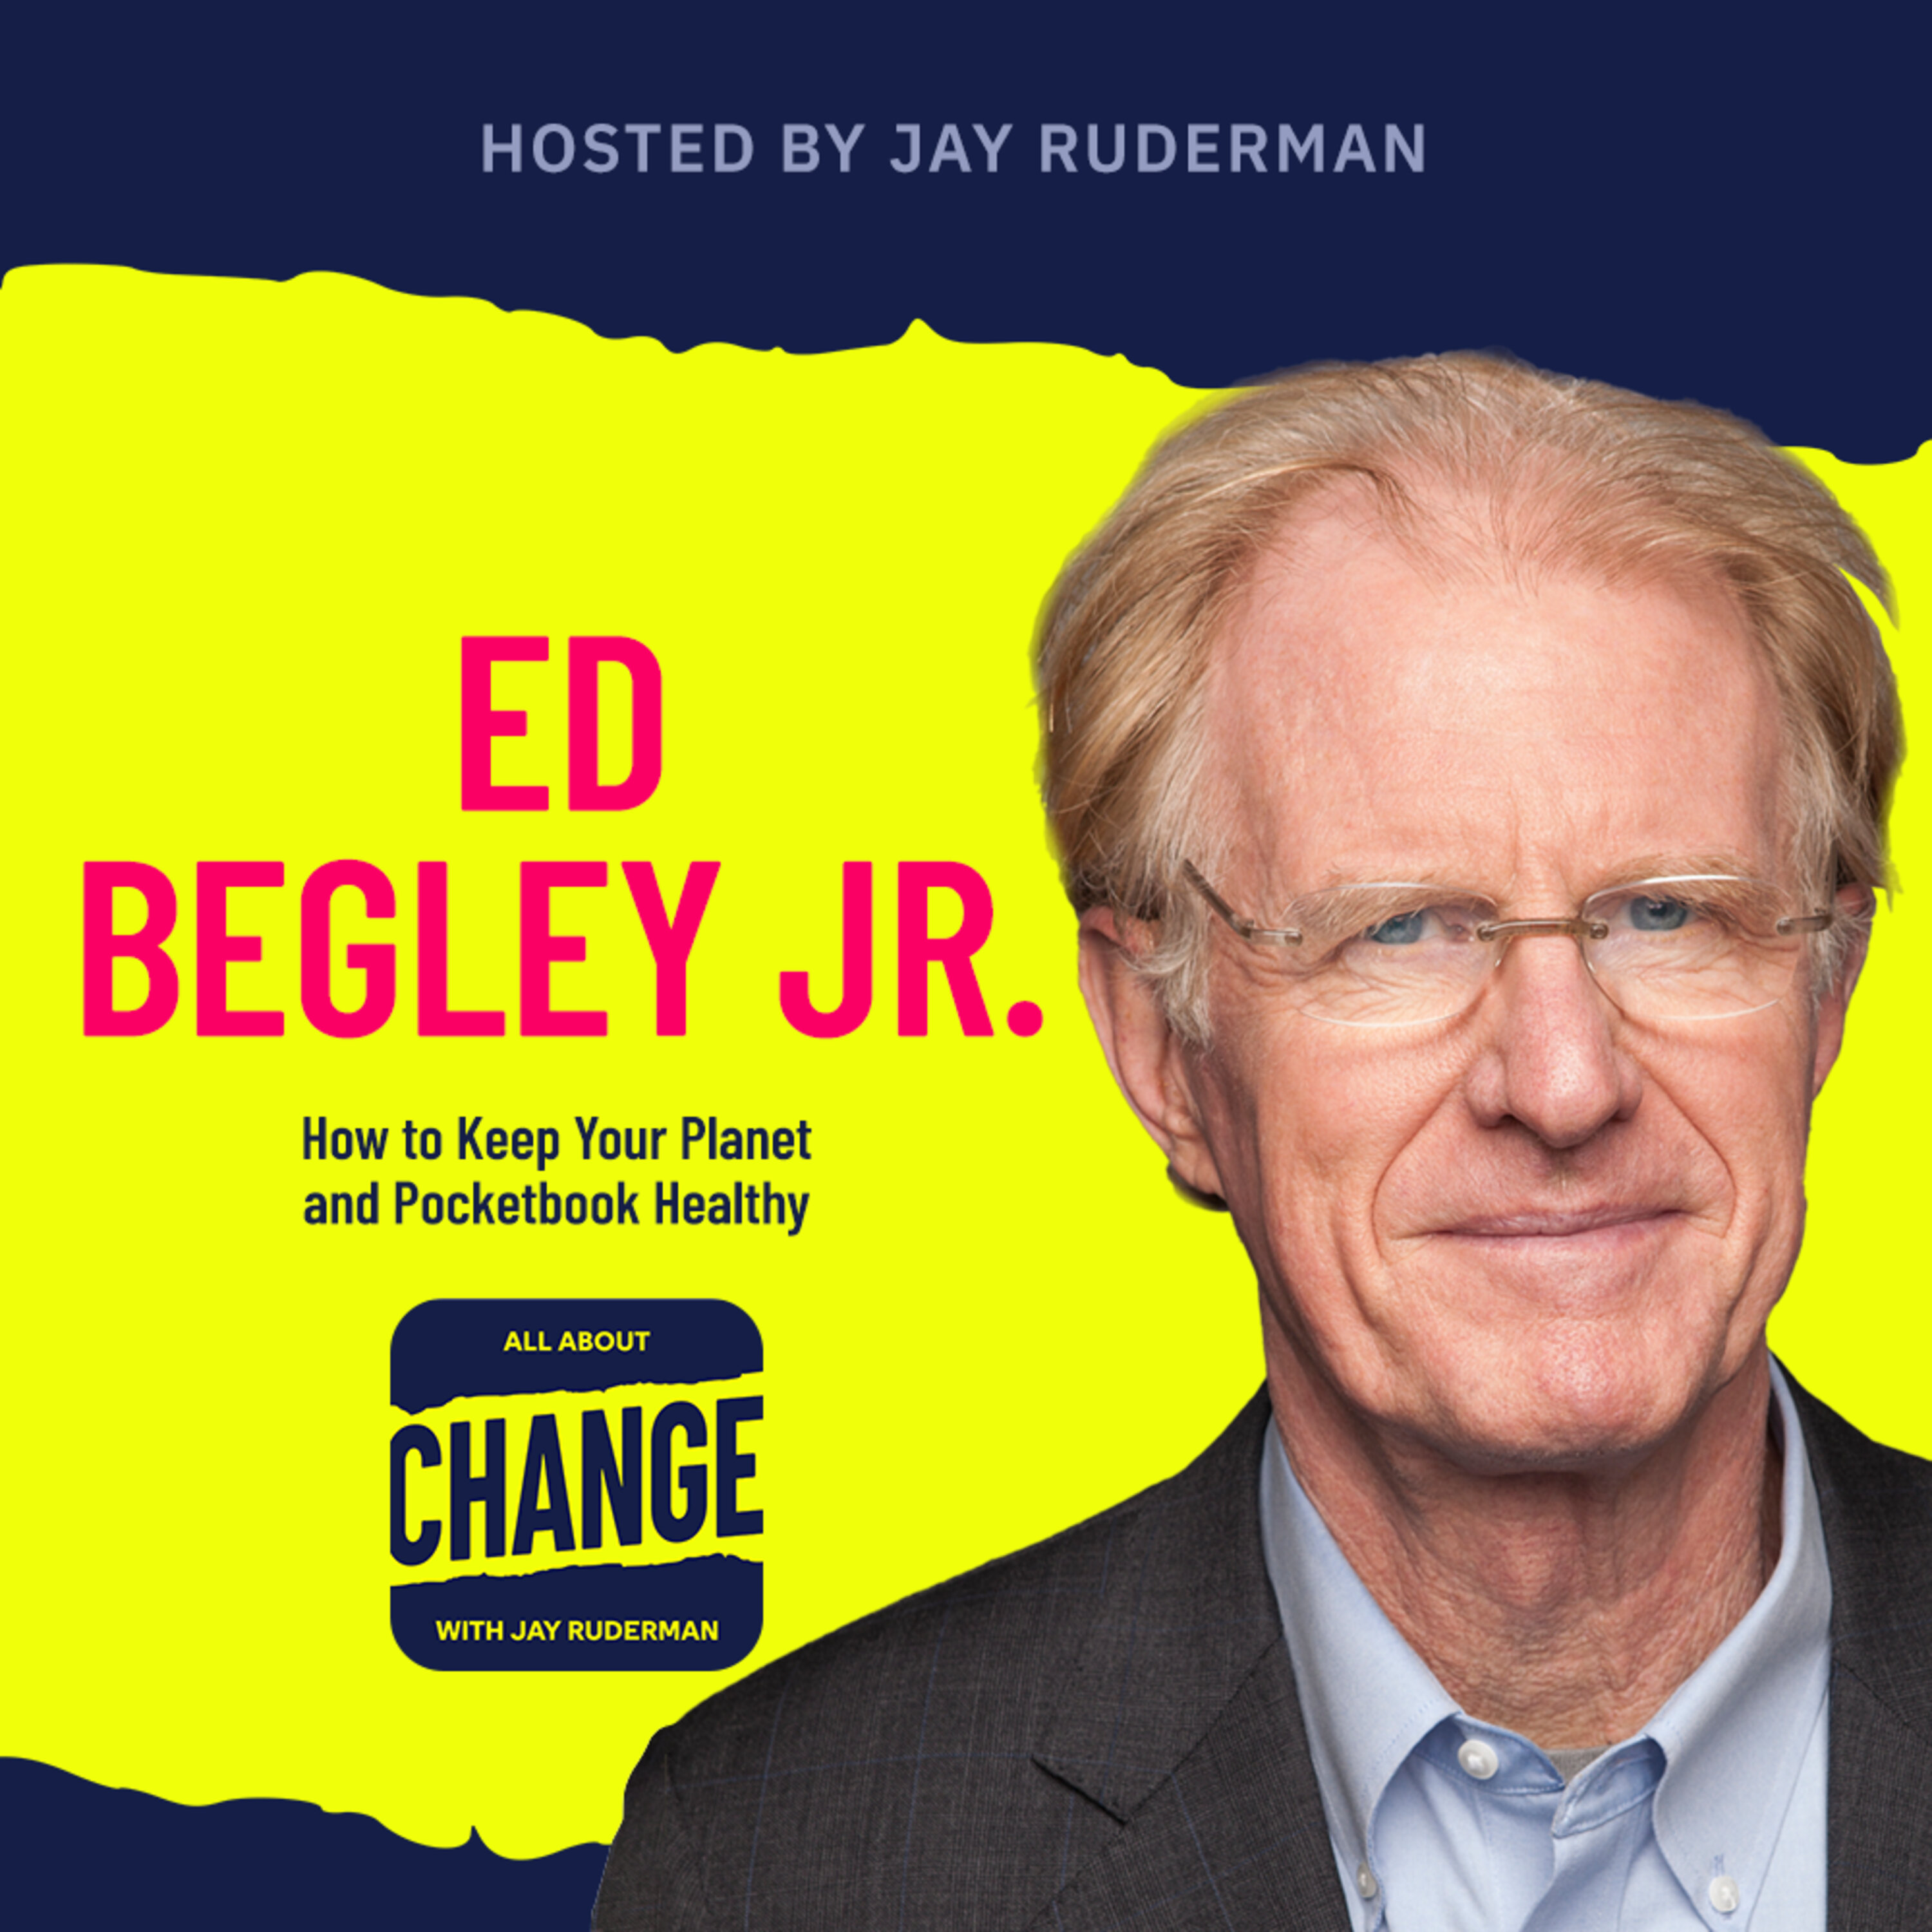 Ed Begley Jr - How to Keep Your Planet and Pocketbook Healthy by Jay Ruderman